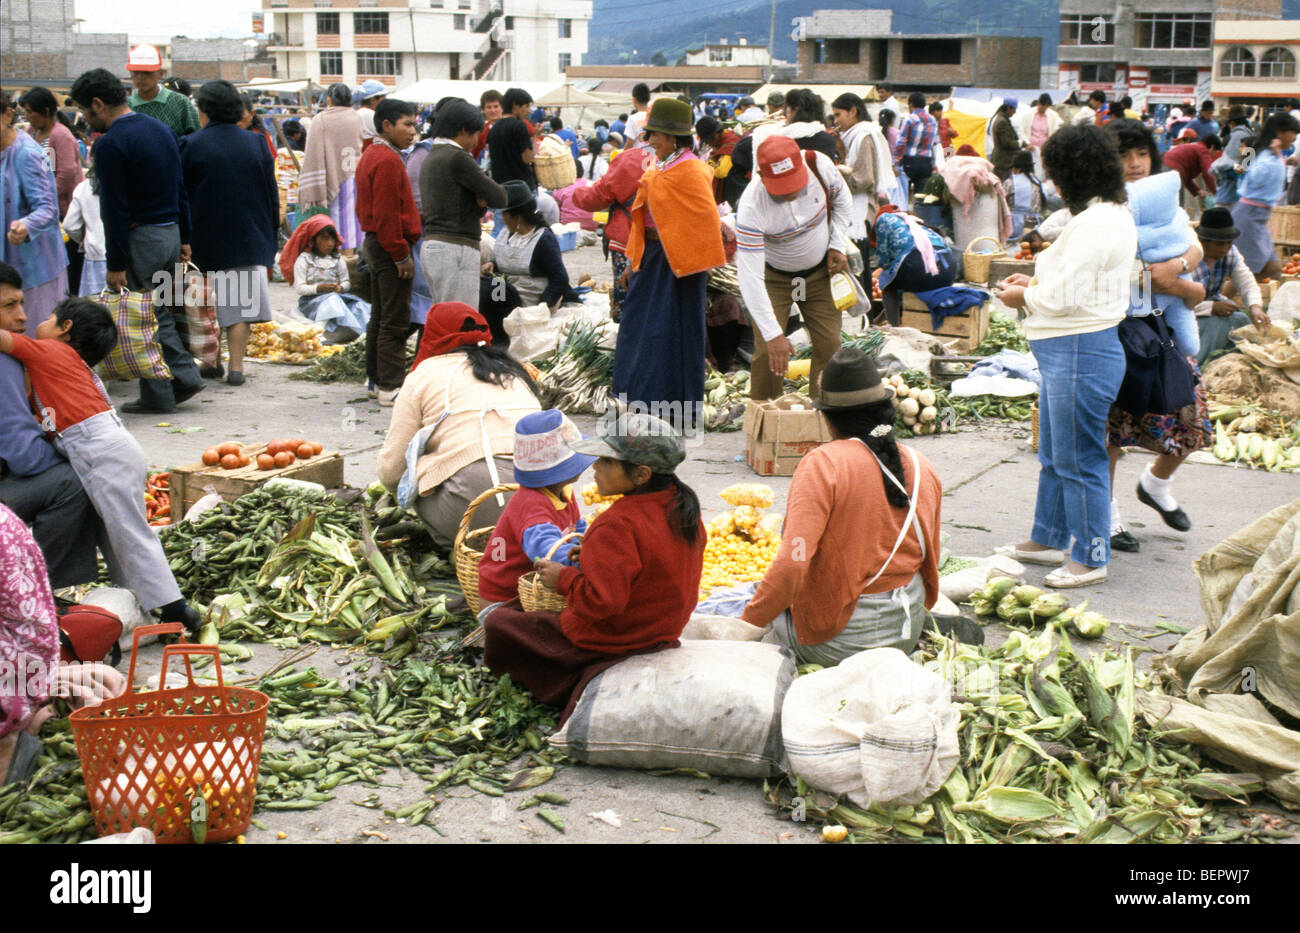 Group of women sit amongst vegetables for sale in local upland Ecuador market. Stock Photo